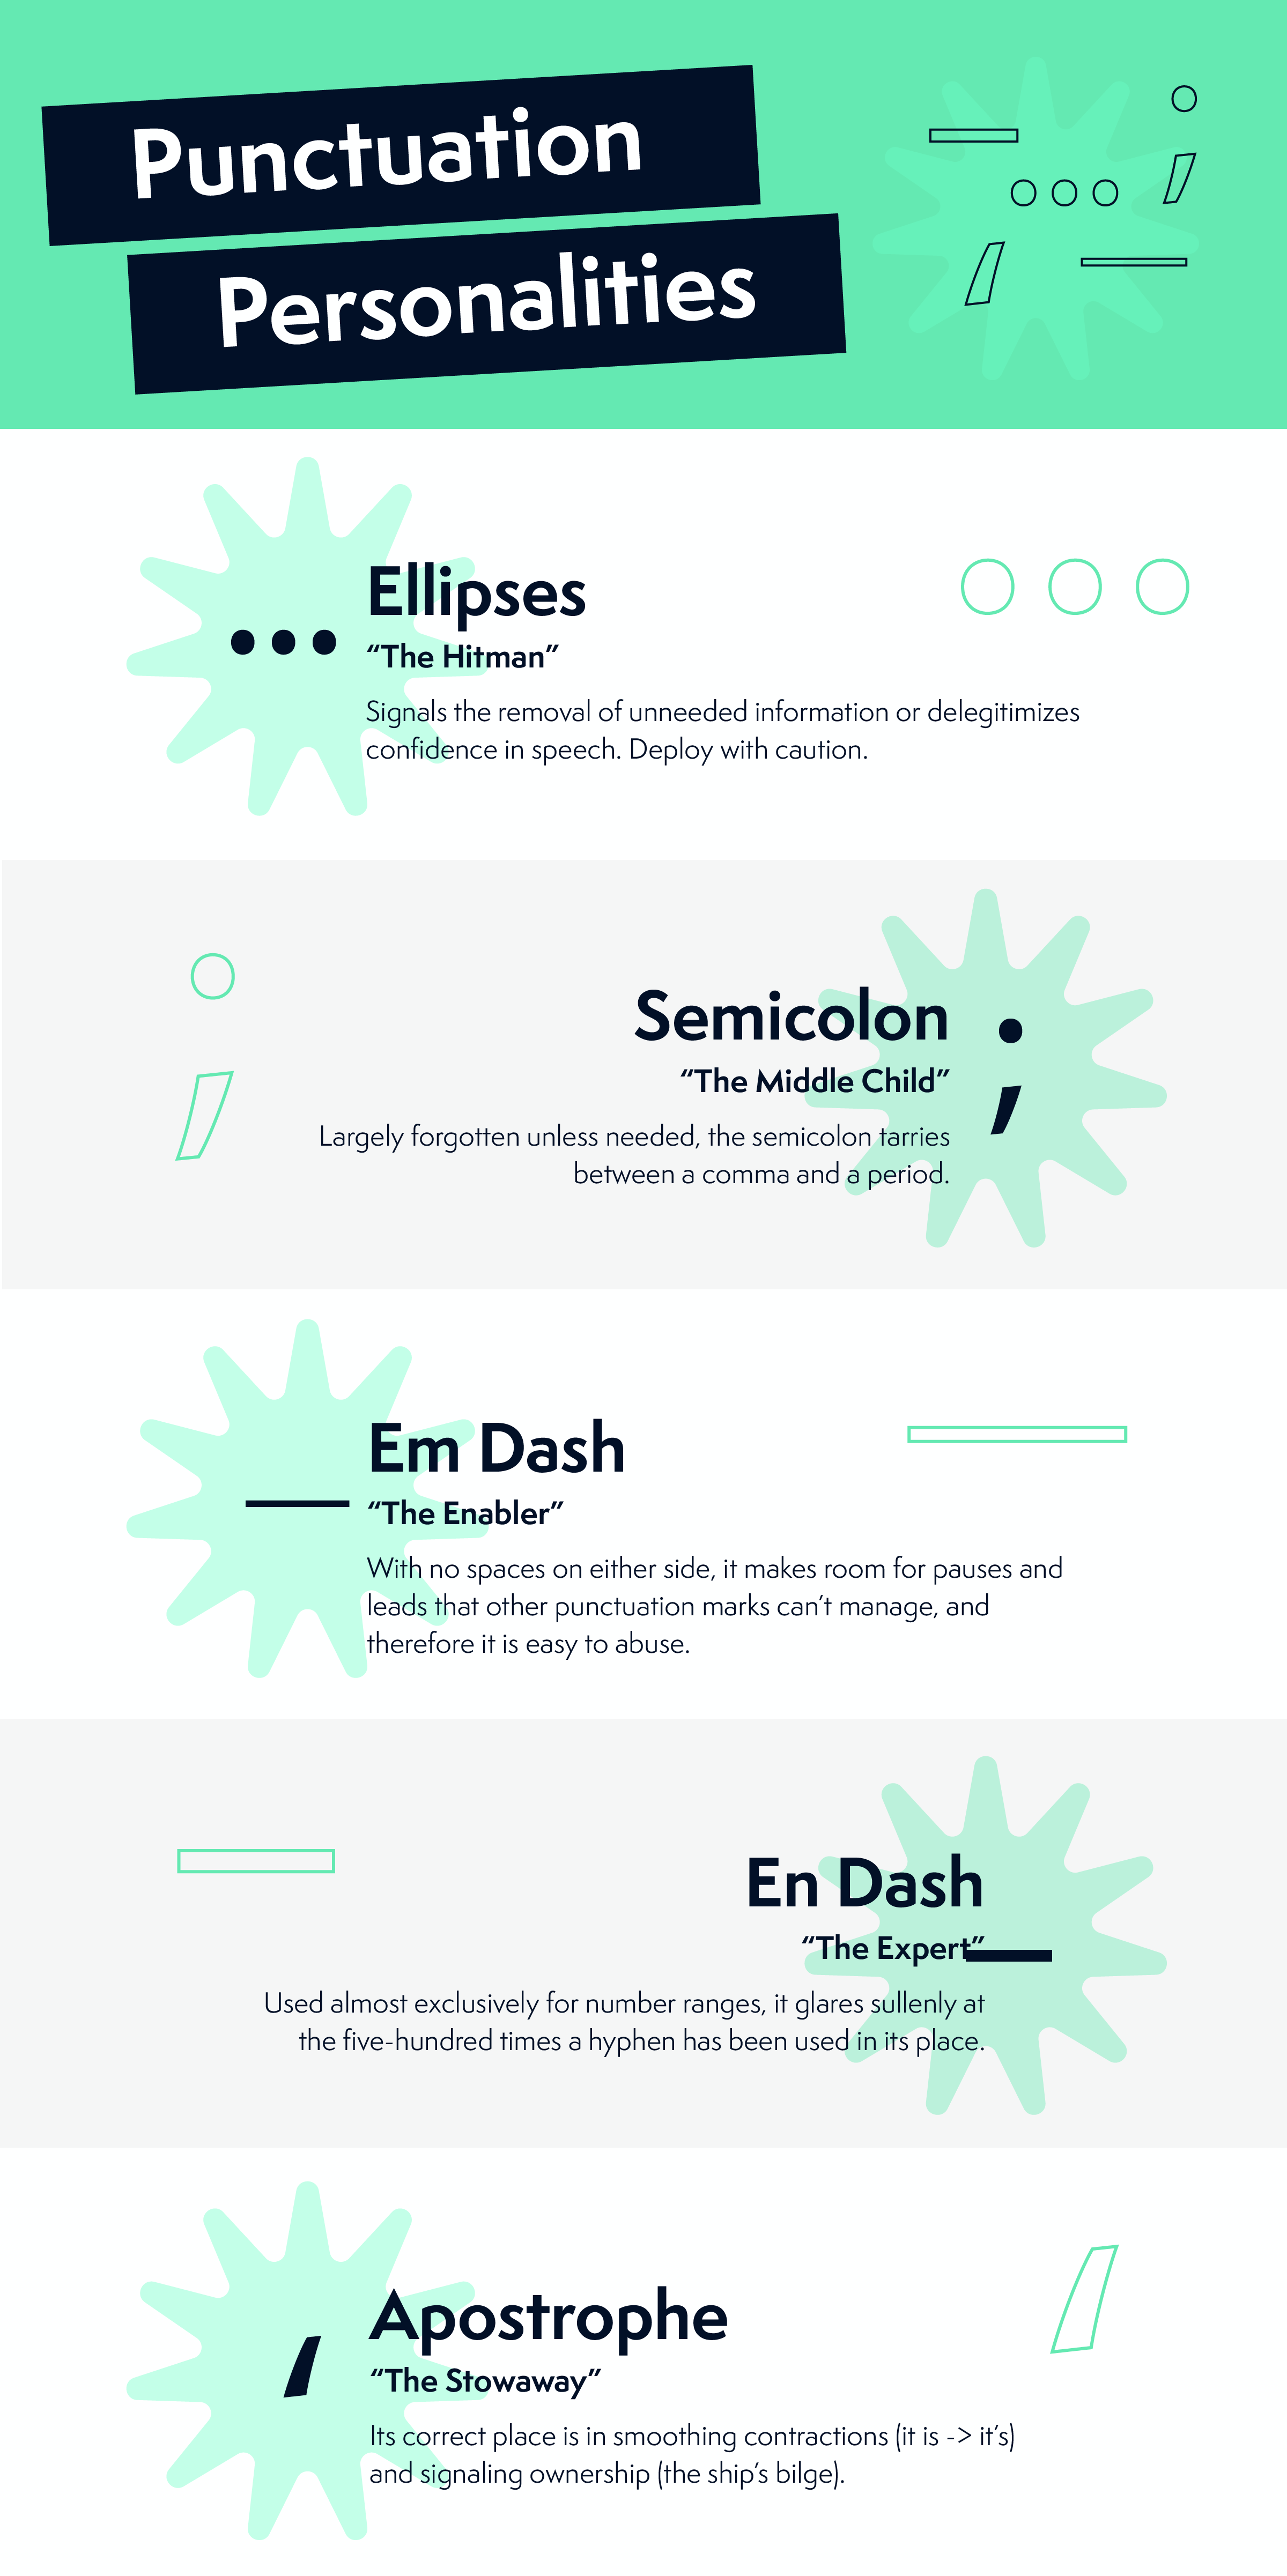 Punctuation Personalities infographic